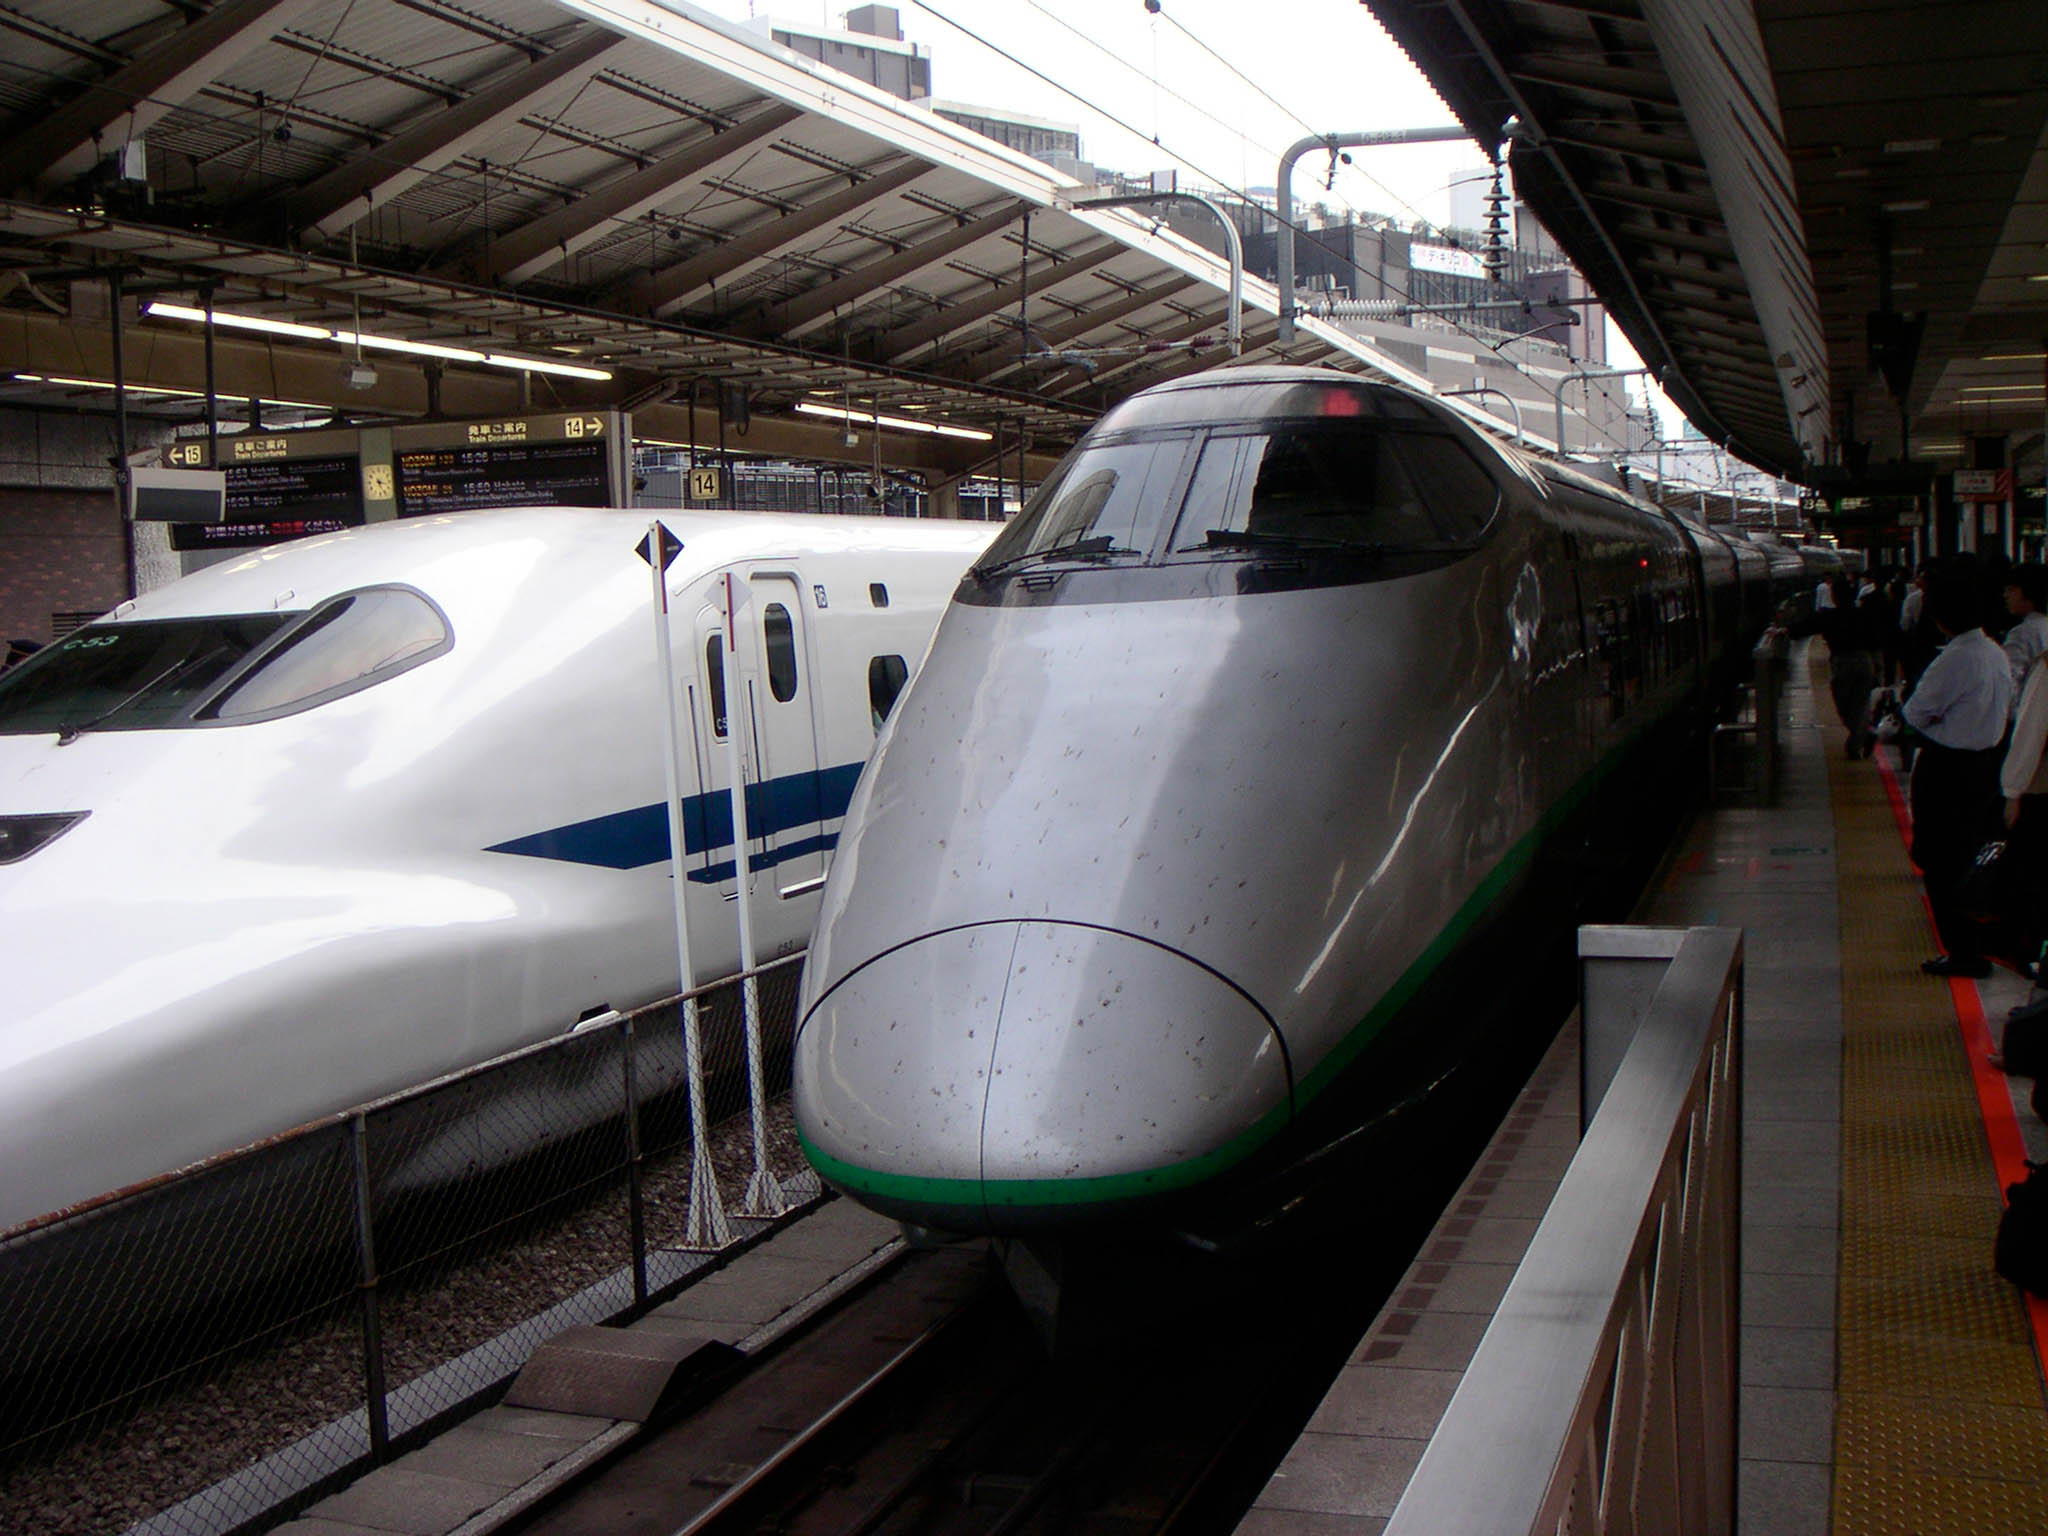 Facilities for the disabled in Japan are to improved, including at train stations, the Government has announced